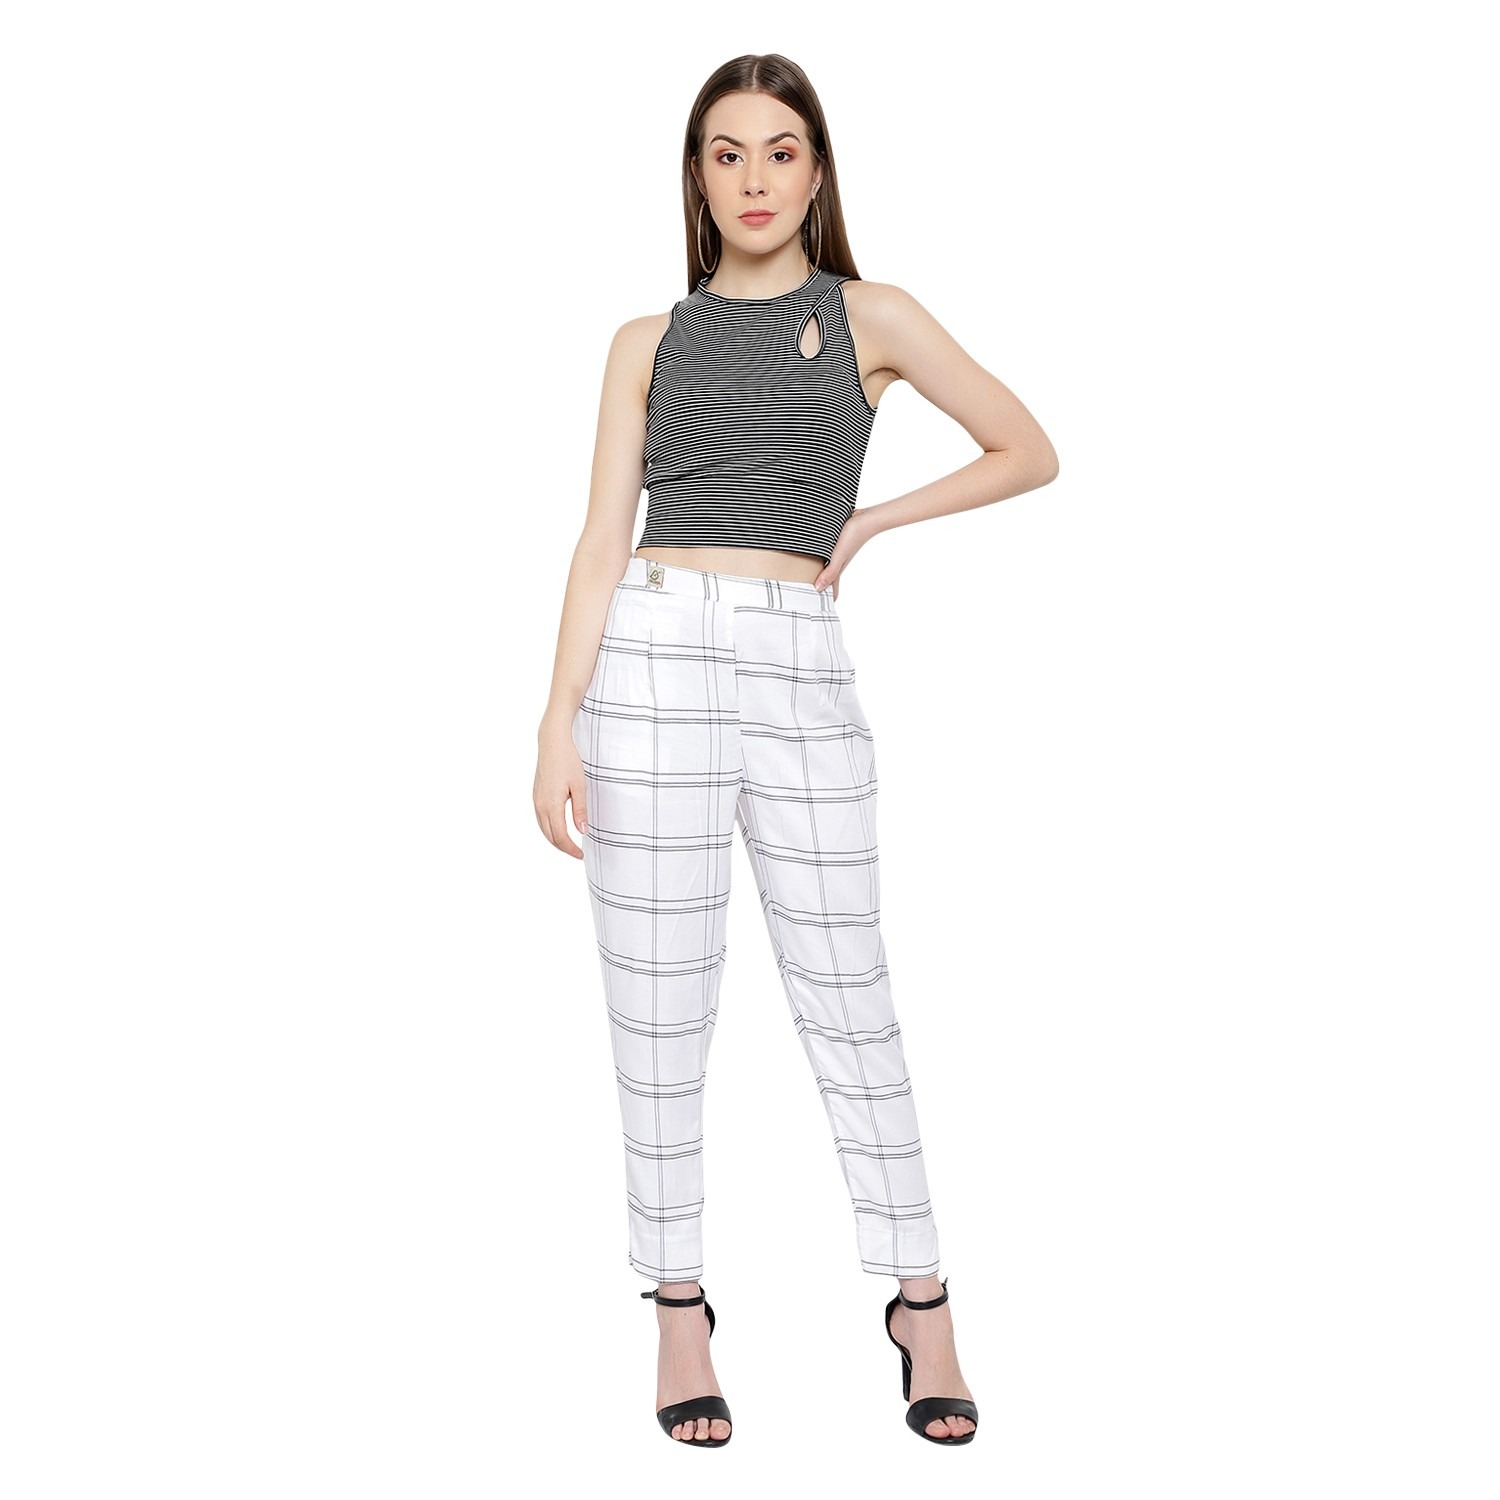 Buy 90's Plaid Trousers, Beige and Black Checked Pants, Creased Retro  Vintage Pants, Medium Large Online in India - Etsy